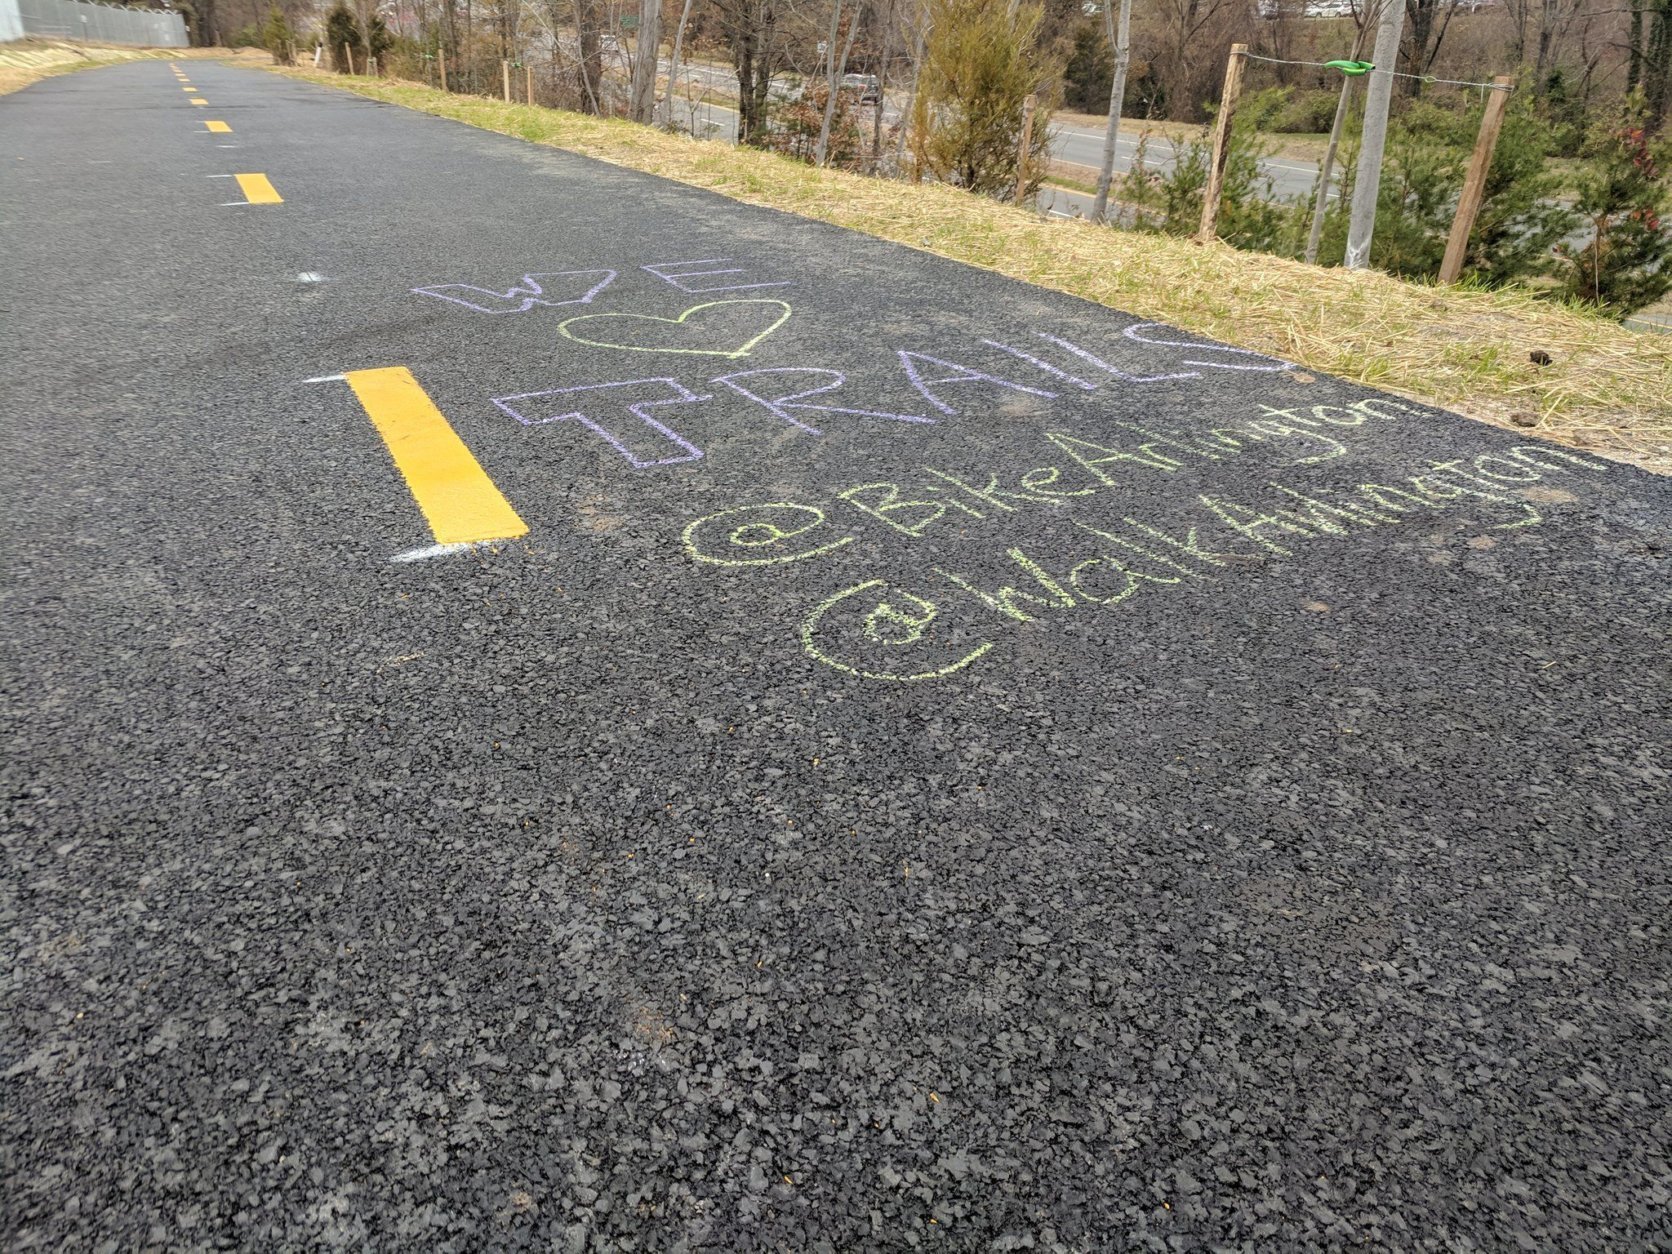 Chalk marks trail-goers enthusiasm for the new Washington Boulevard Trail. (A bridge built for the Washington Boulevard Trail. (Courtesy Arlington Department of Environmental Services)